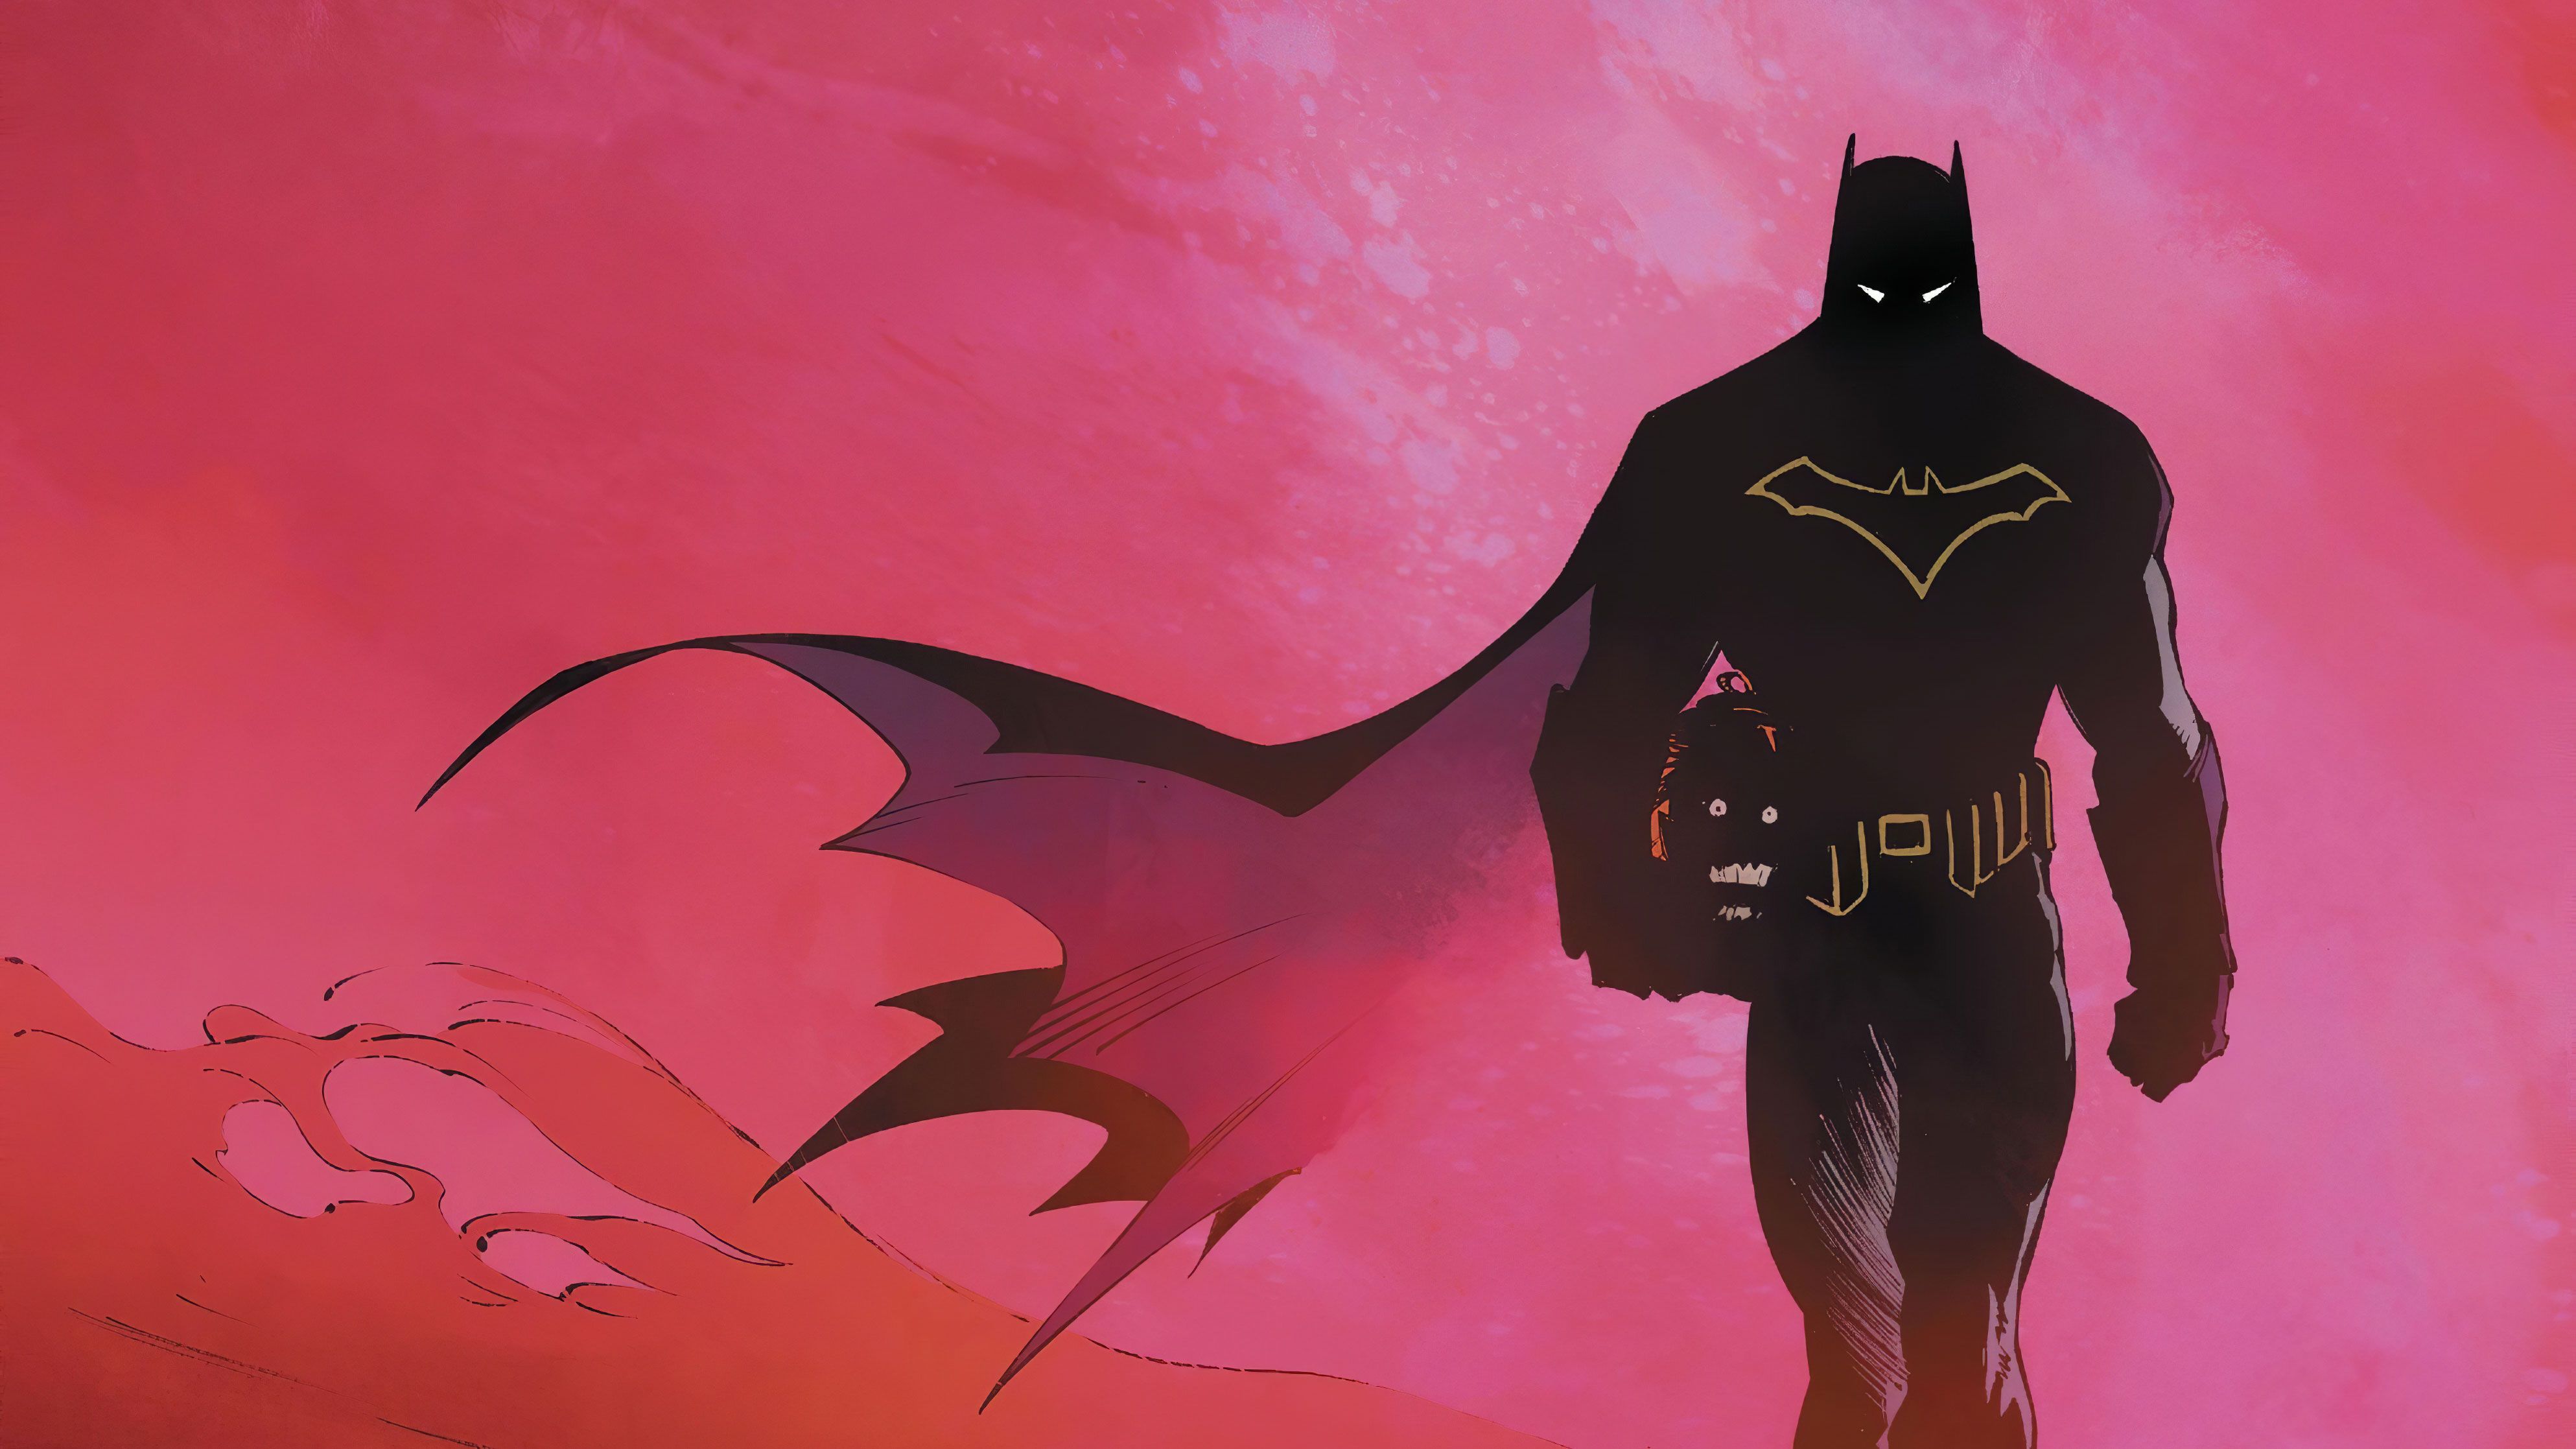 4k Batman Pink Background, HD Superheroes, 4k Wallpaper, Image, Background, Photo and Picture